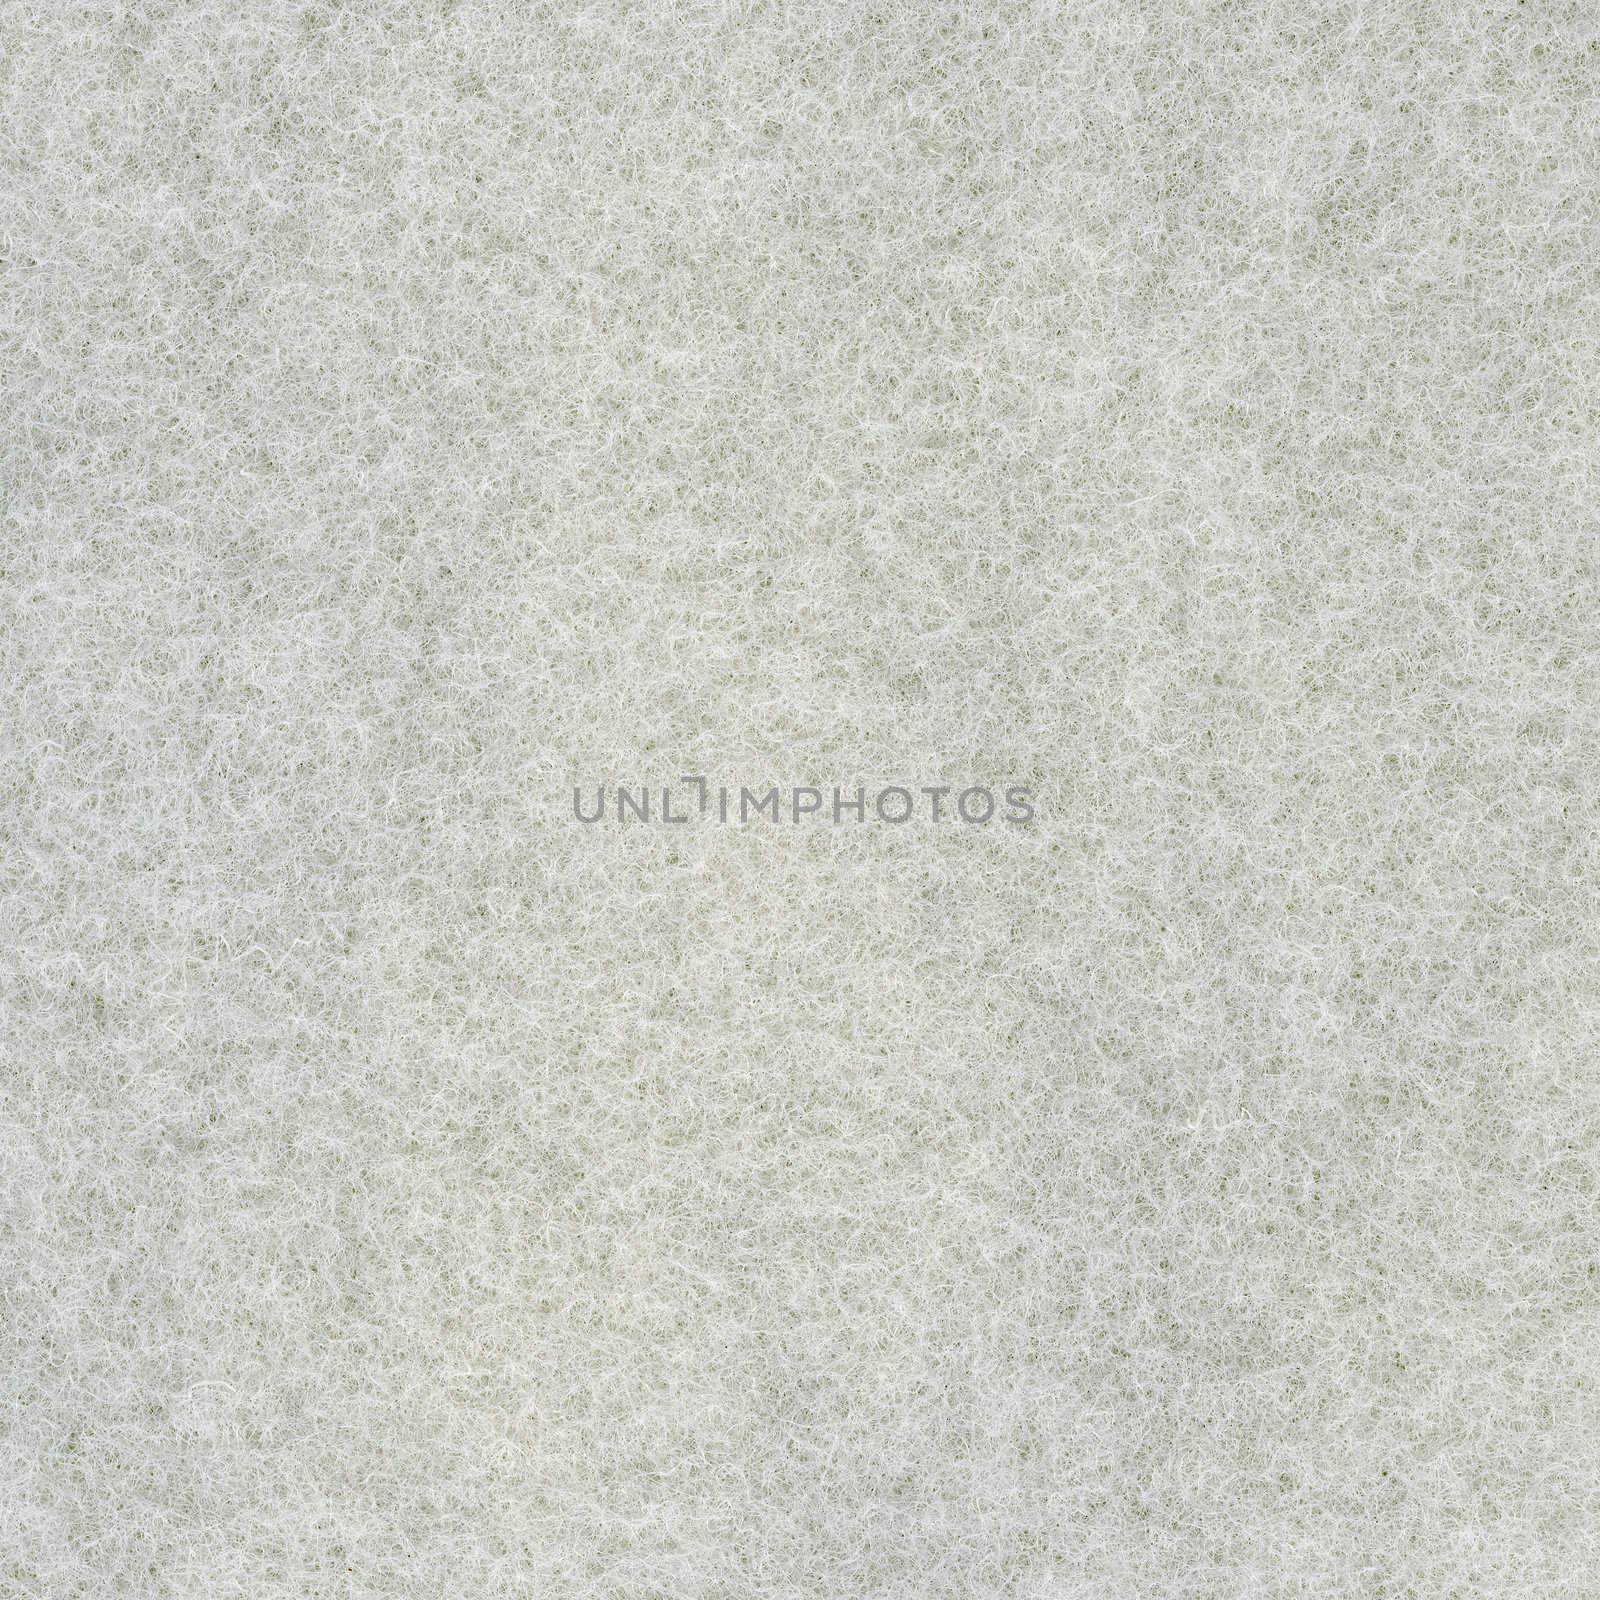 abstract chaotic background - dense white filtering material texture